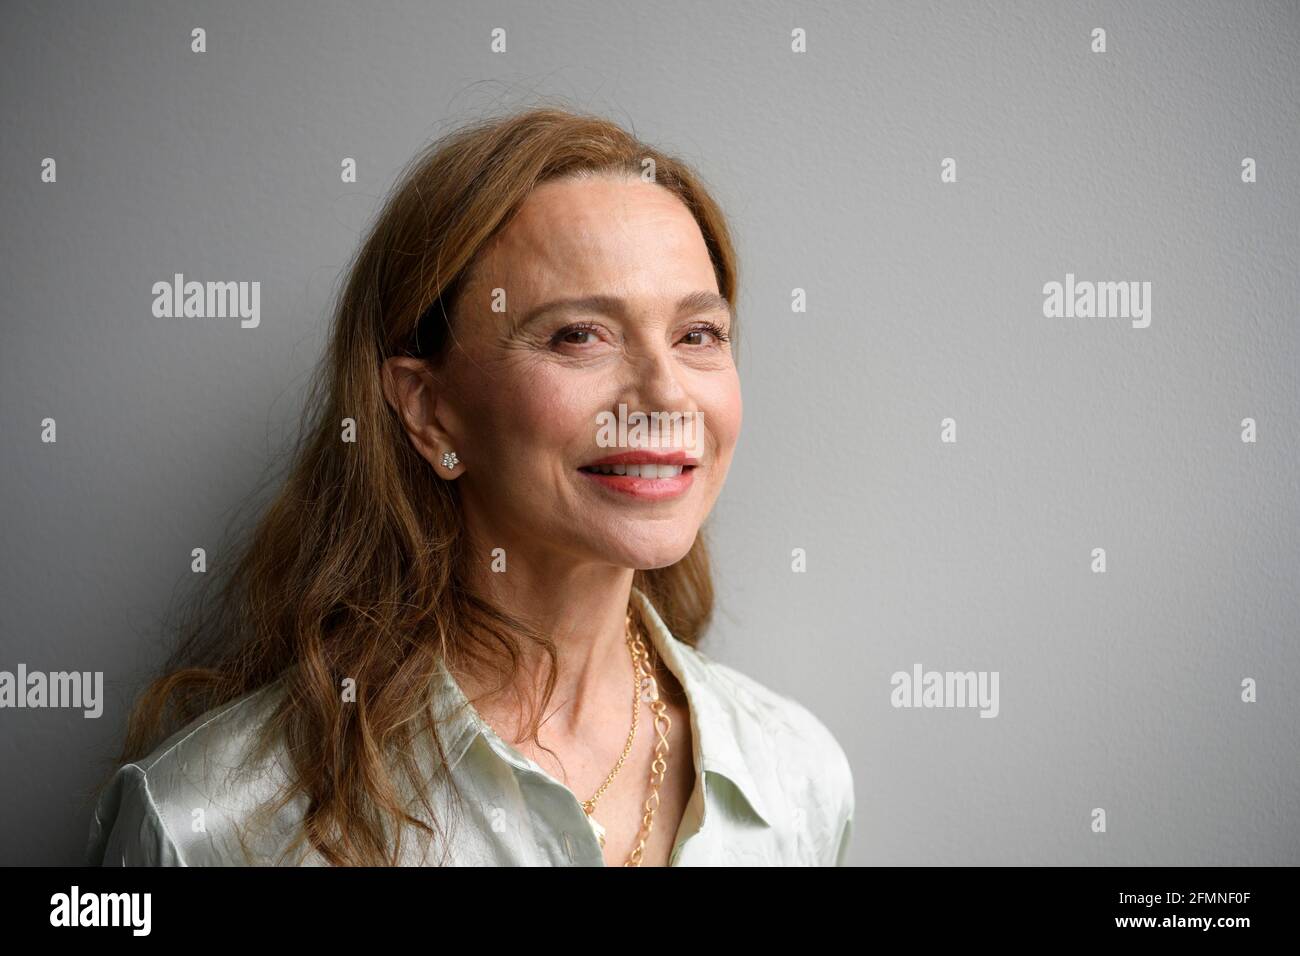 Lena Olin, who will star in Lasse Hallstrom's new film about the Swedish artist Hilma af Klint, photographed in Stockholm, Sweden, on May 10, 2021. Photo: Henrik Montgomery / TT code 10060 Stock Photo